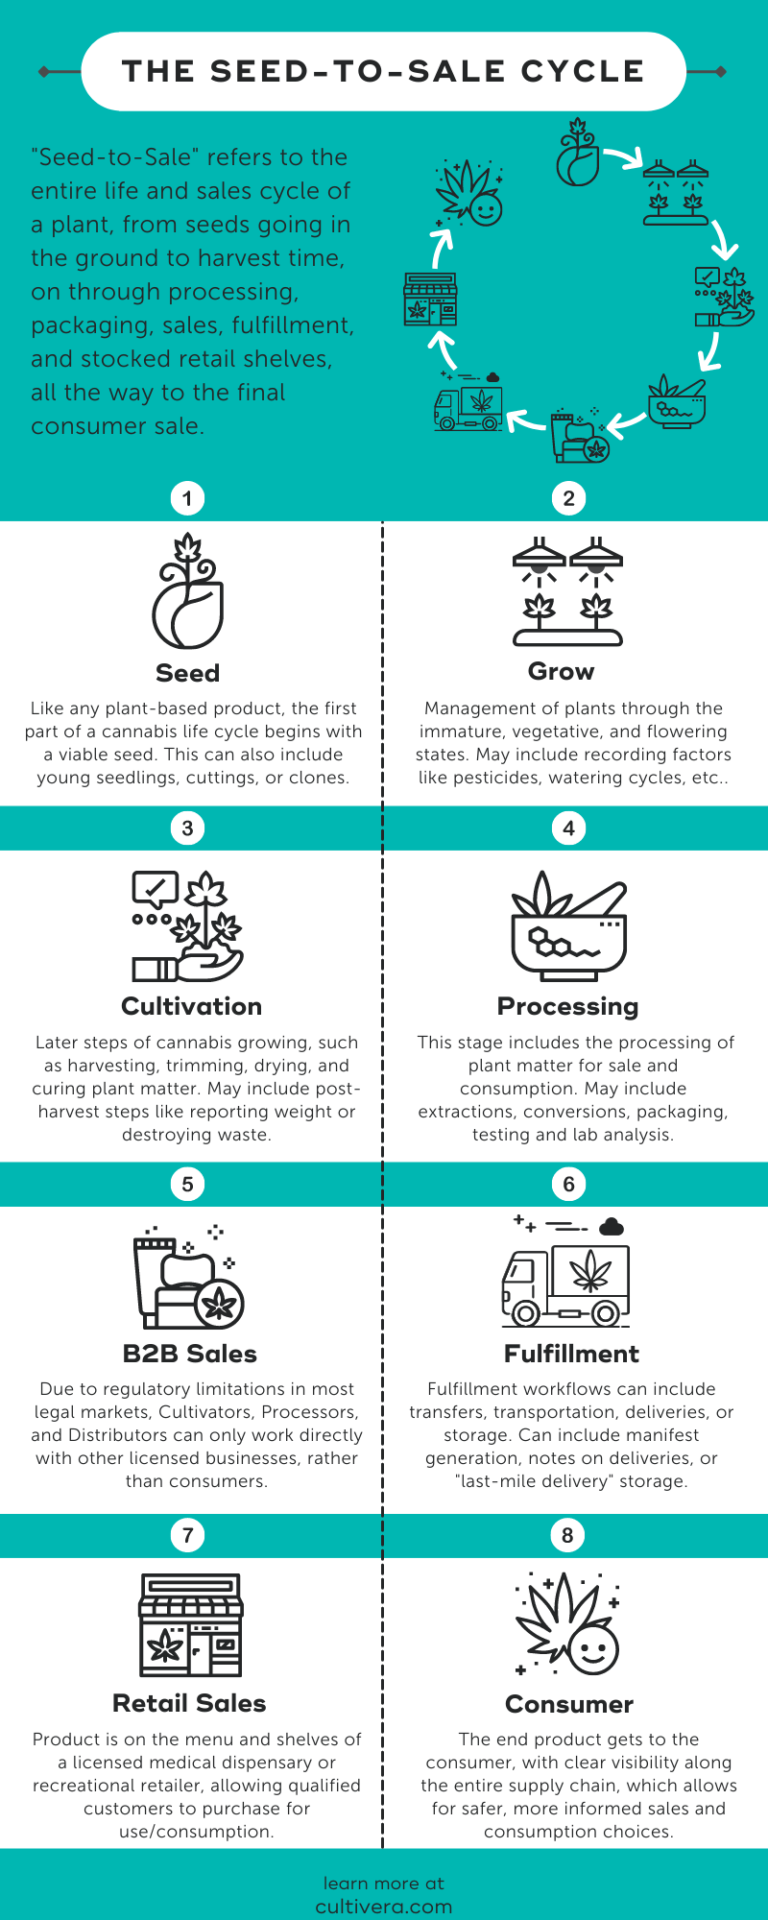 vertical teal and white infographic of the seed-to-sale cycle